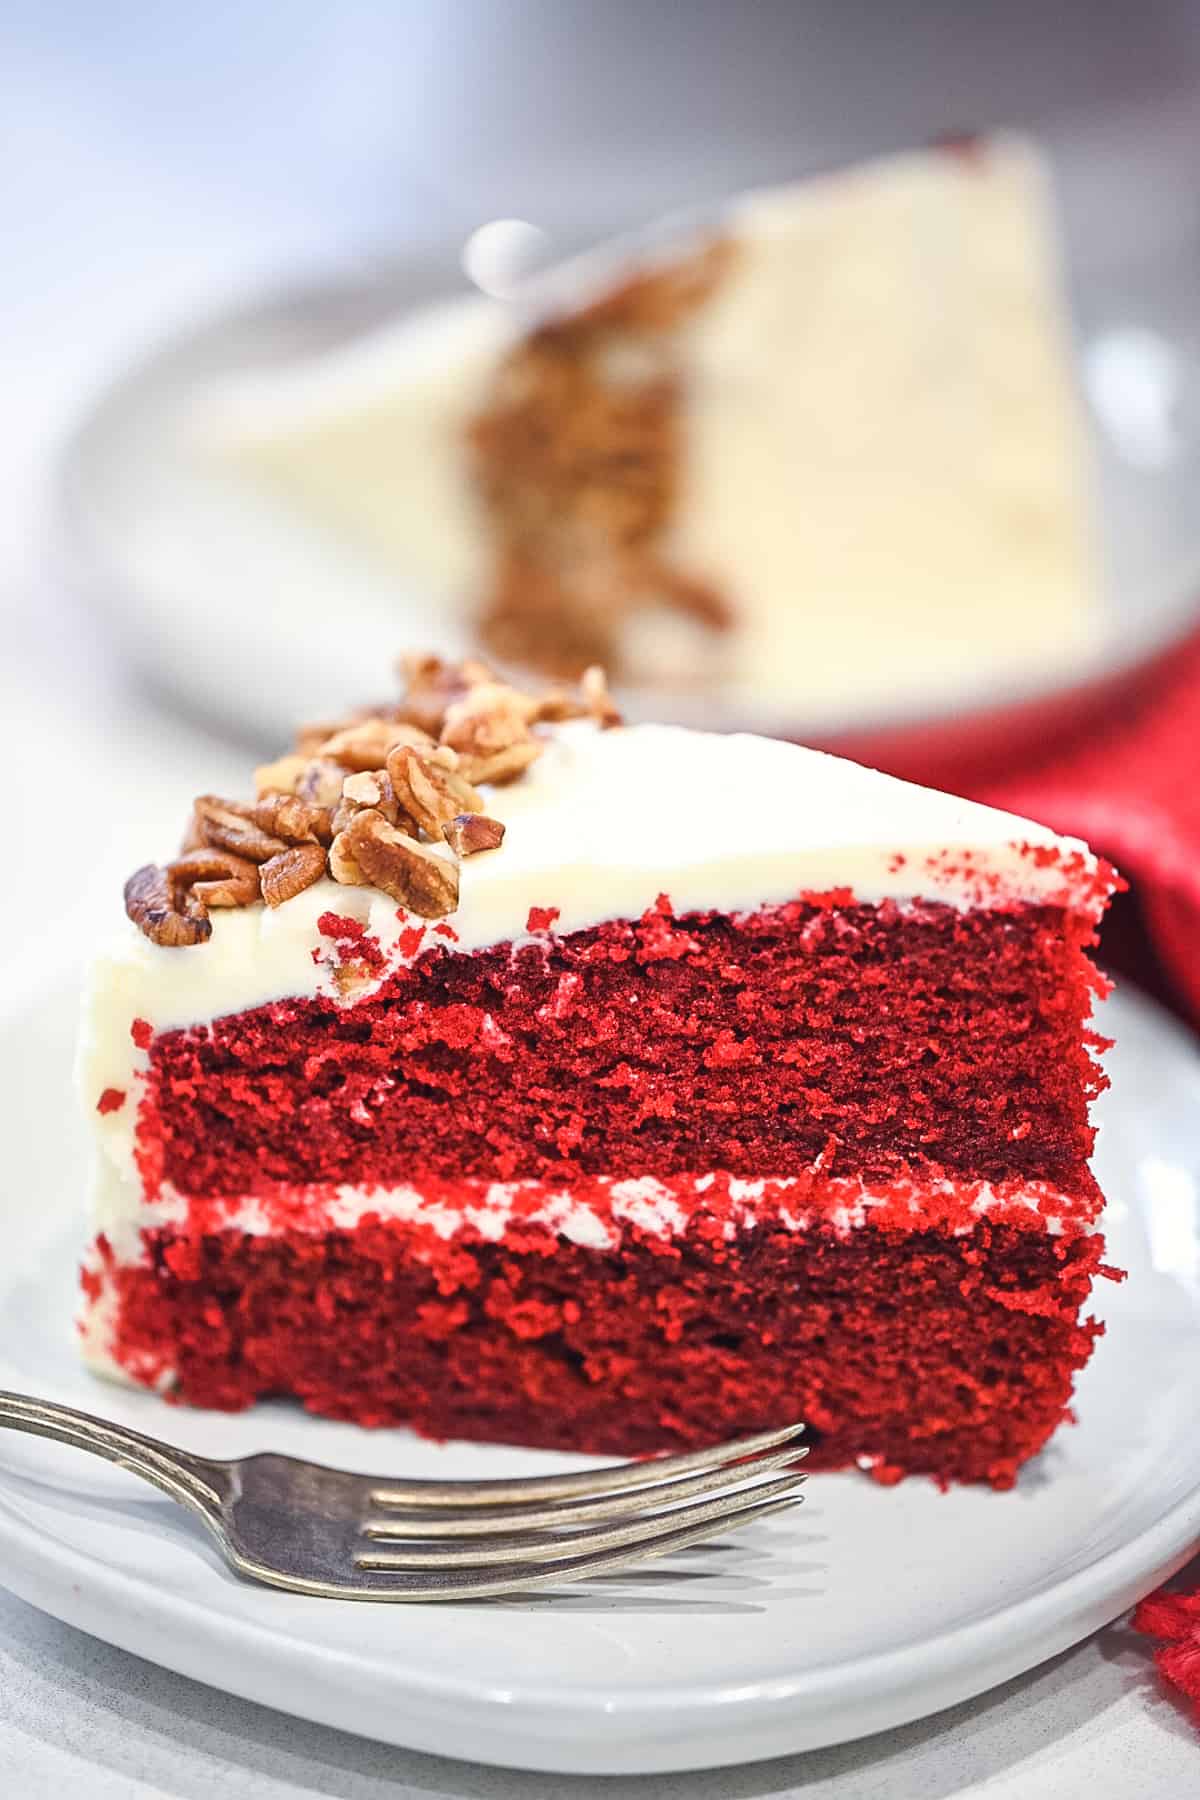 A upclose image of a slice of red velvet cake on a white plate with a fork in front of the cake.